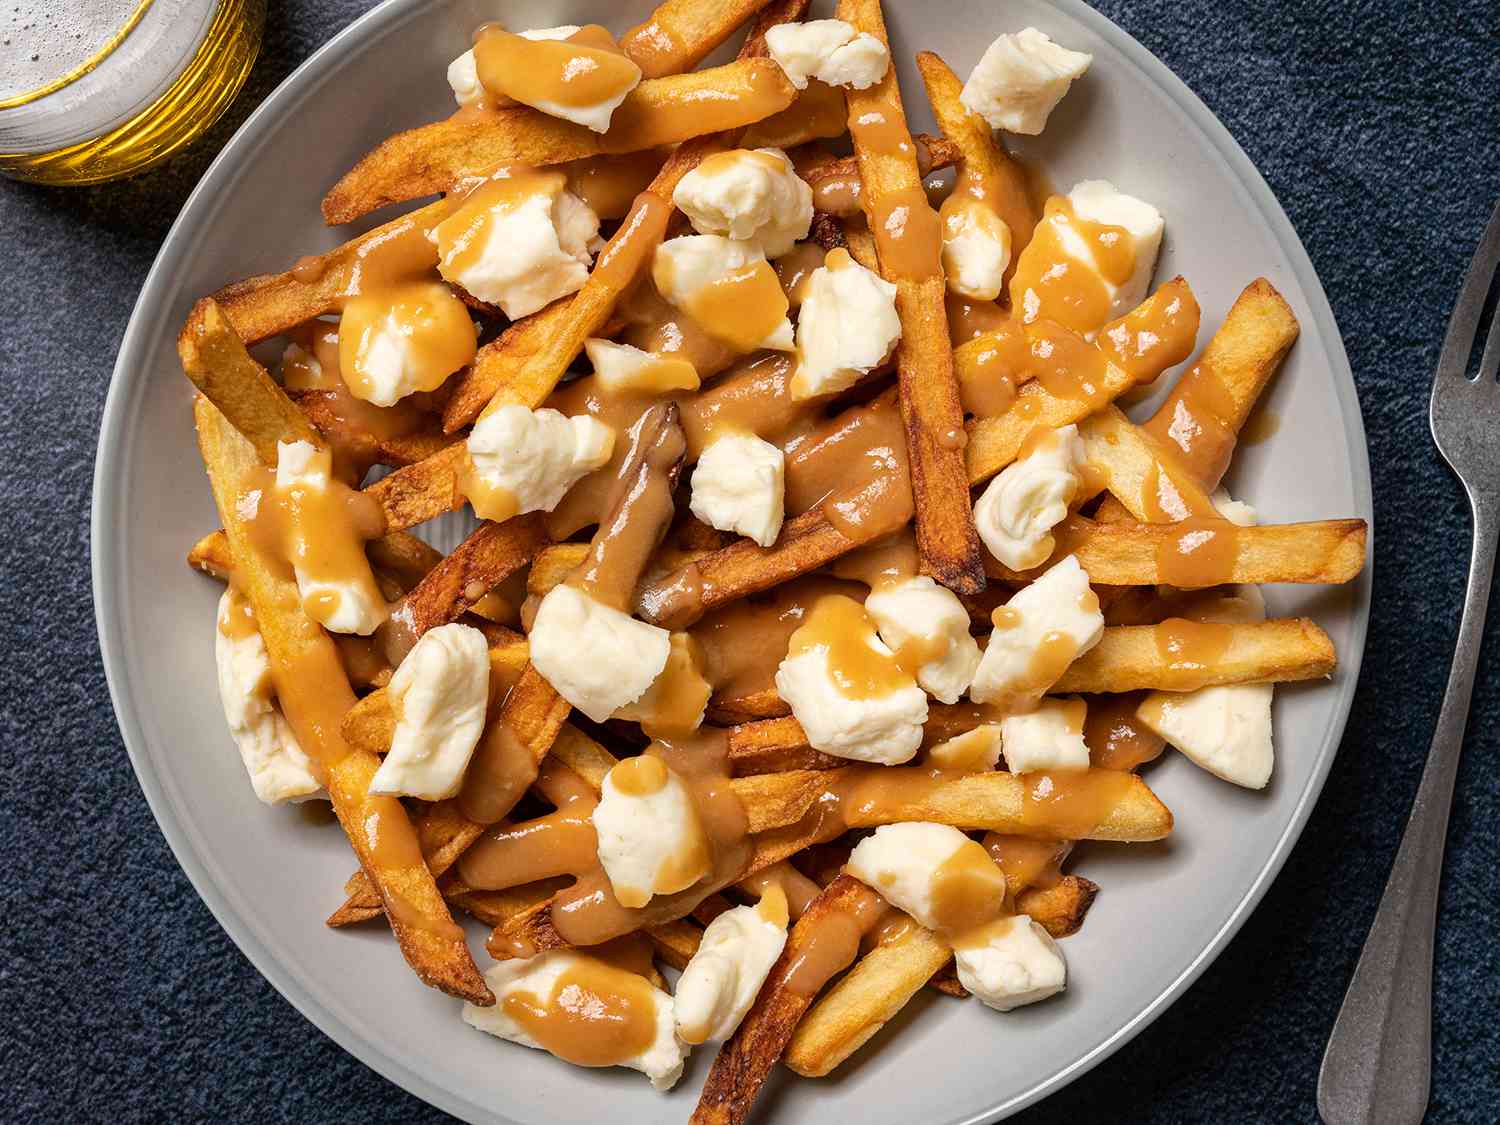 american culturalisms the world doesn't get - poutine with cheese curds